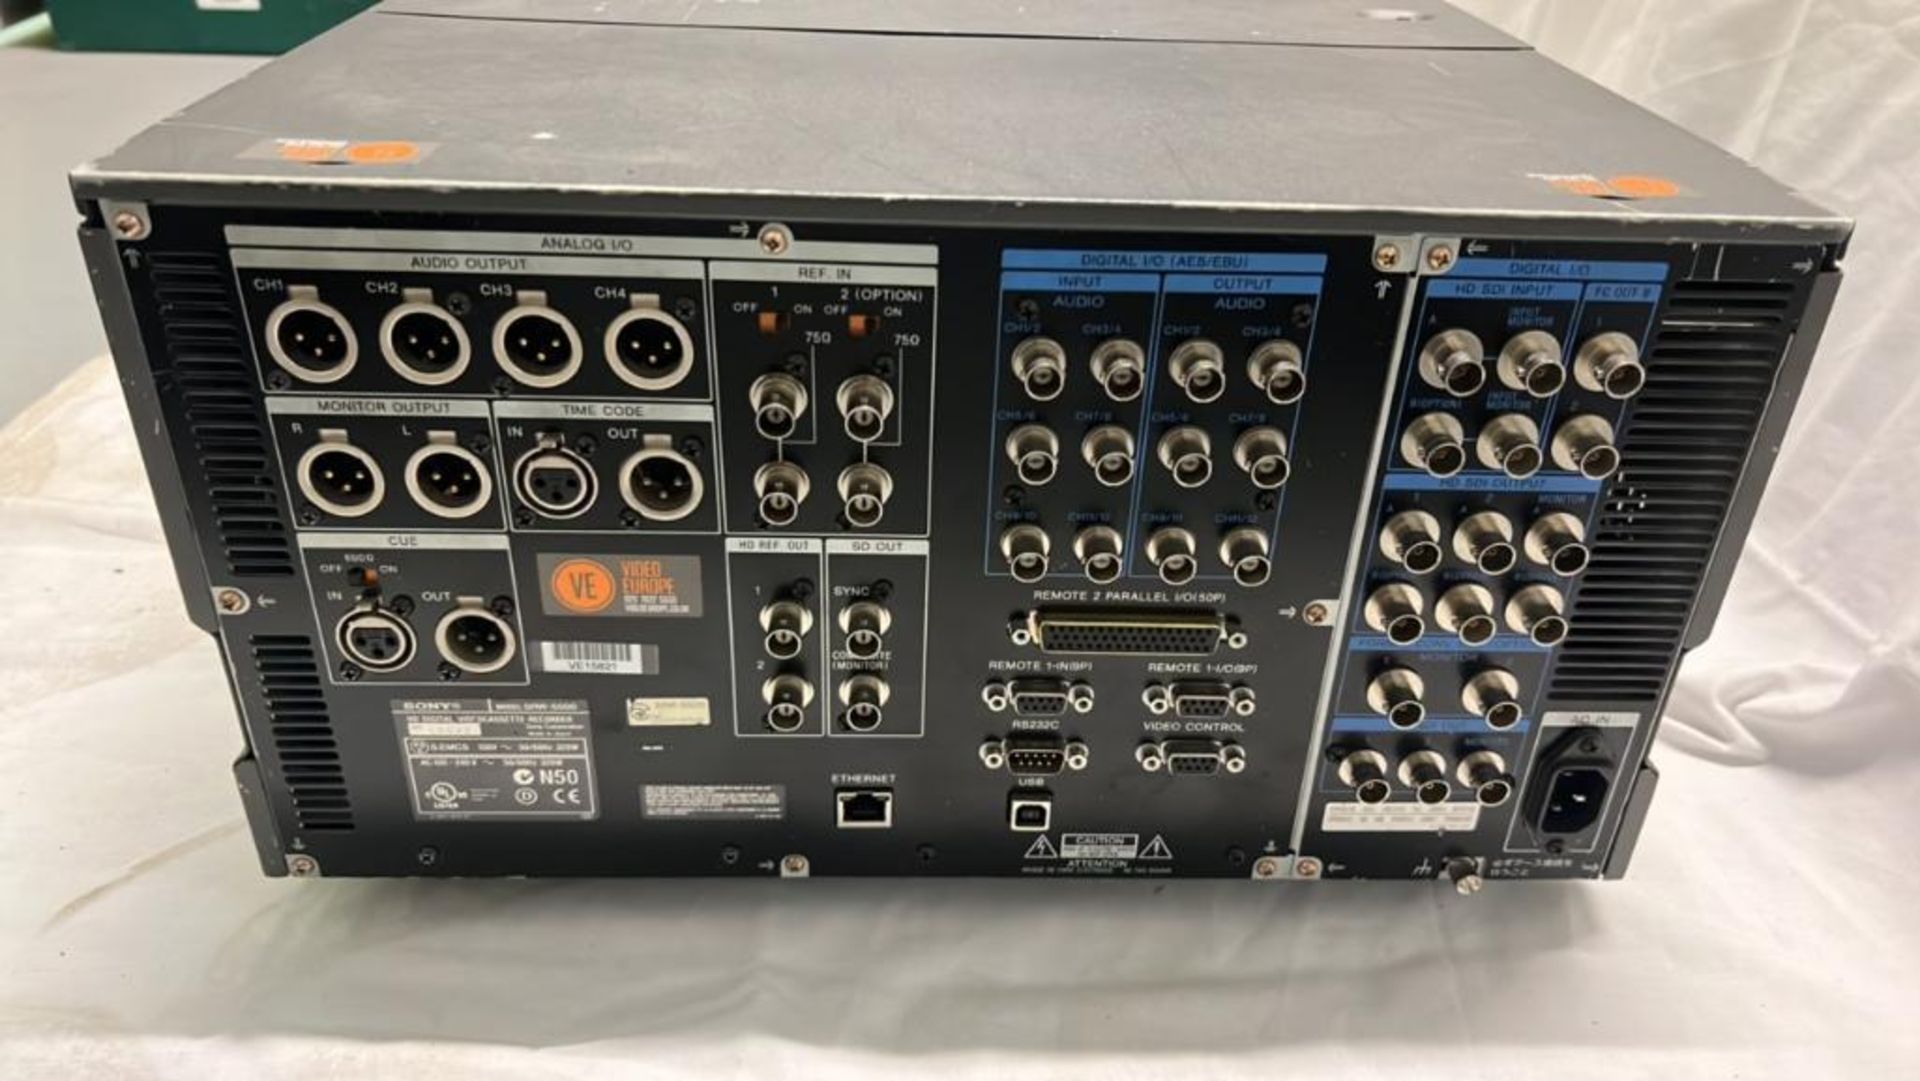 Sony SRW-5500 Digital Videocassette recorder with flight case SN :10042 - Image 4 of 5